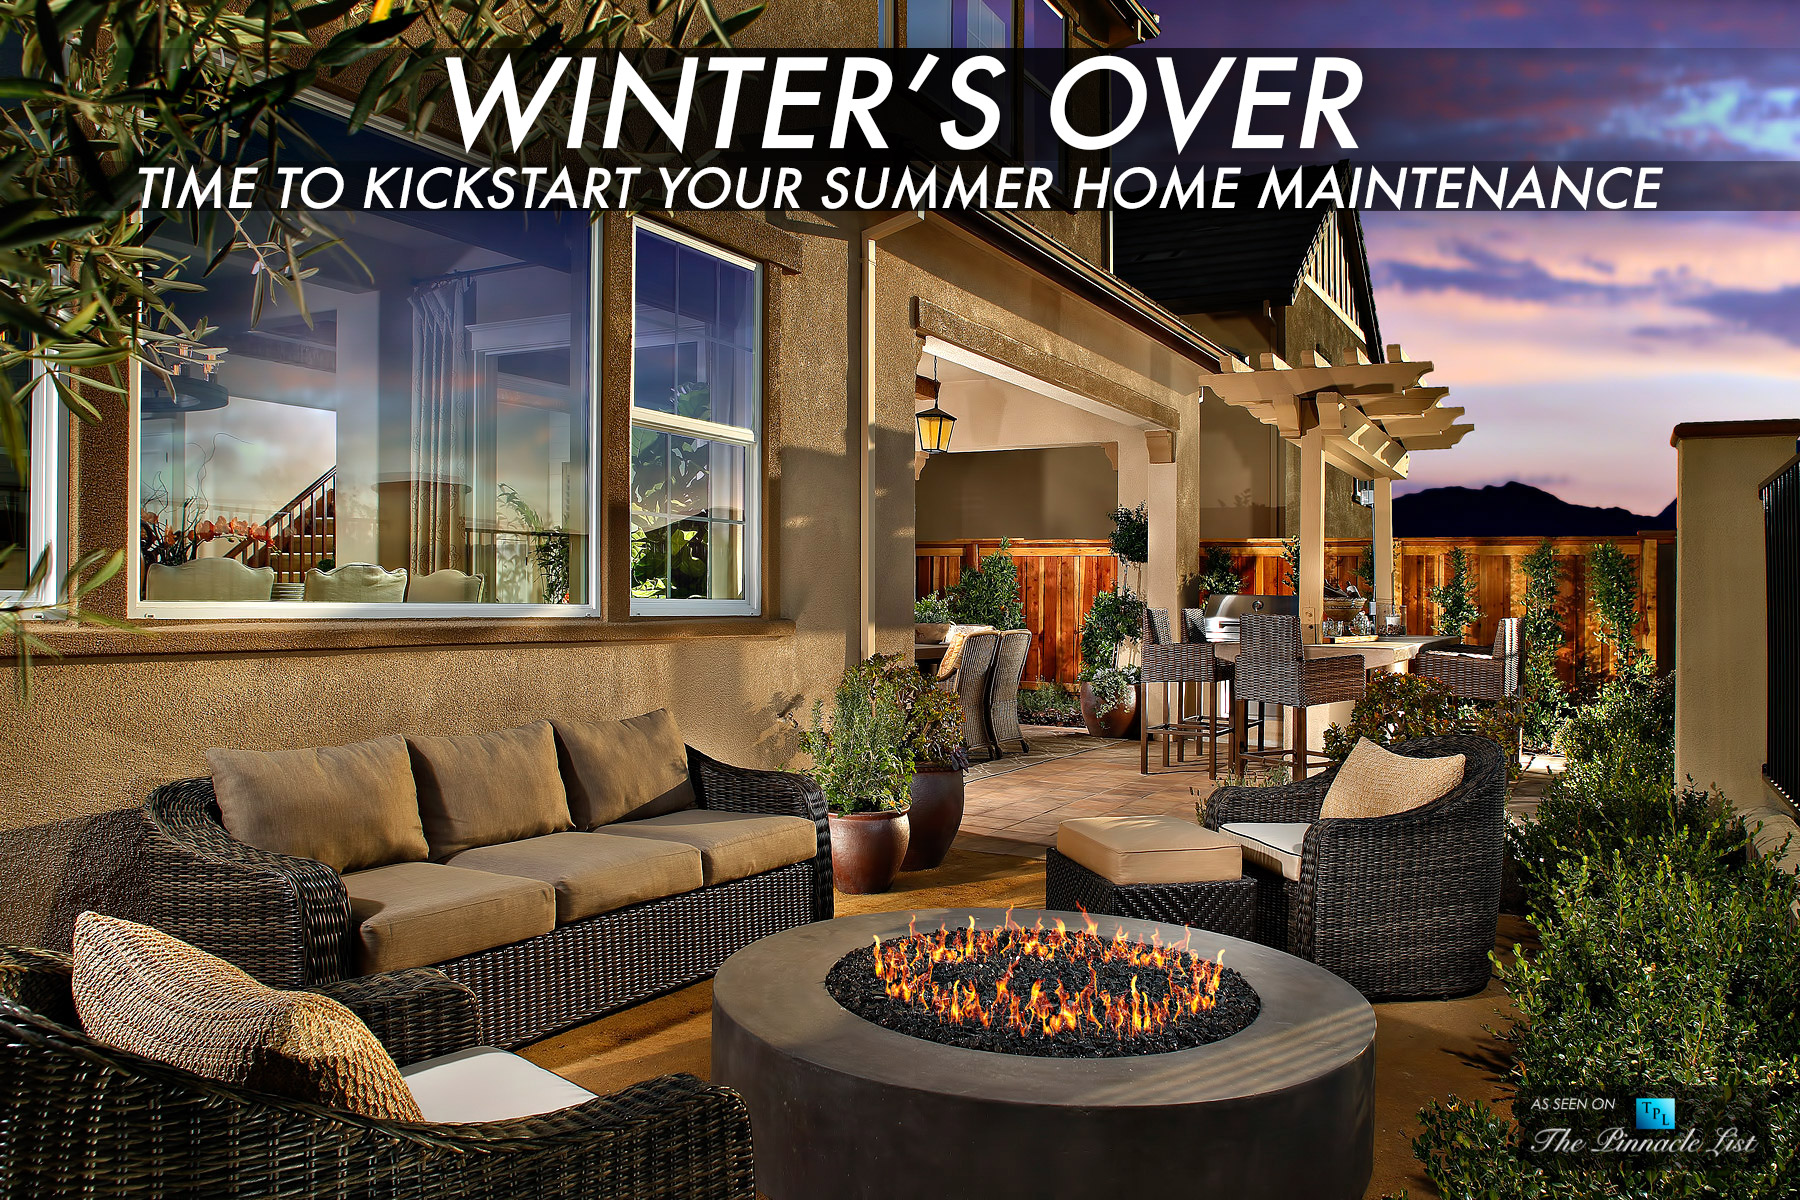 Winter’s Over - Time to Kickstart Your Summer Home Maintenance